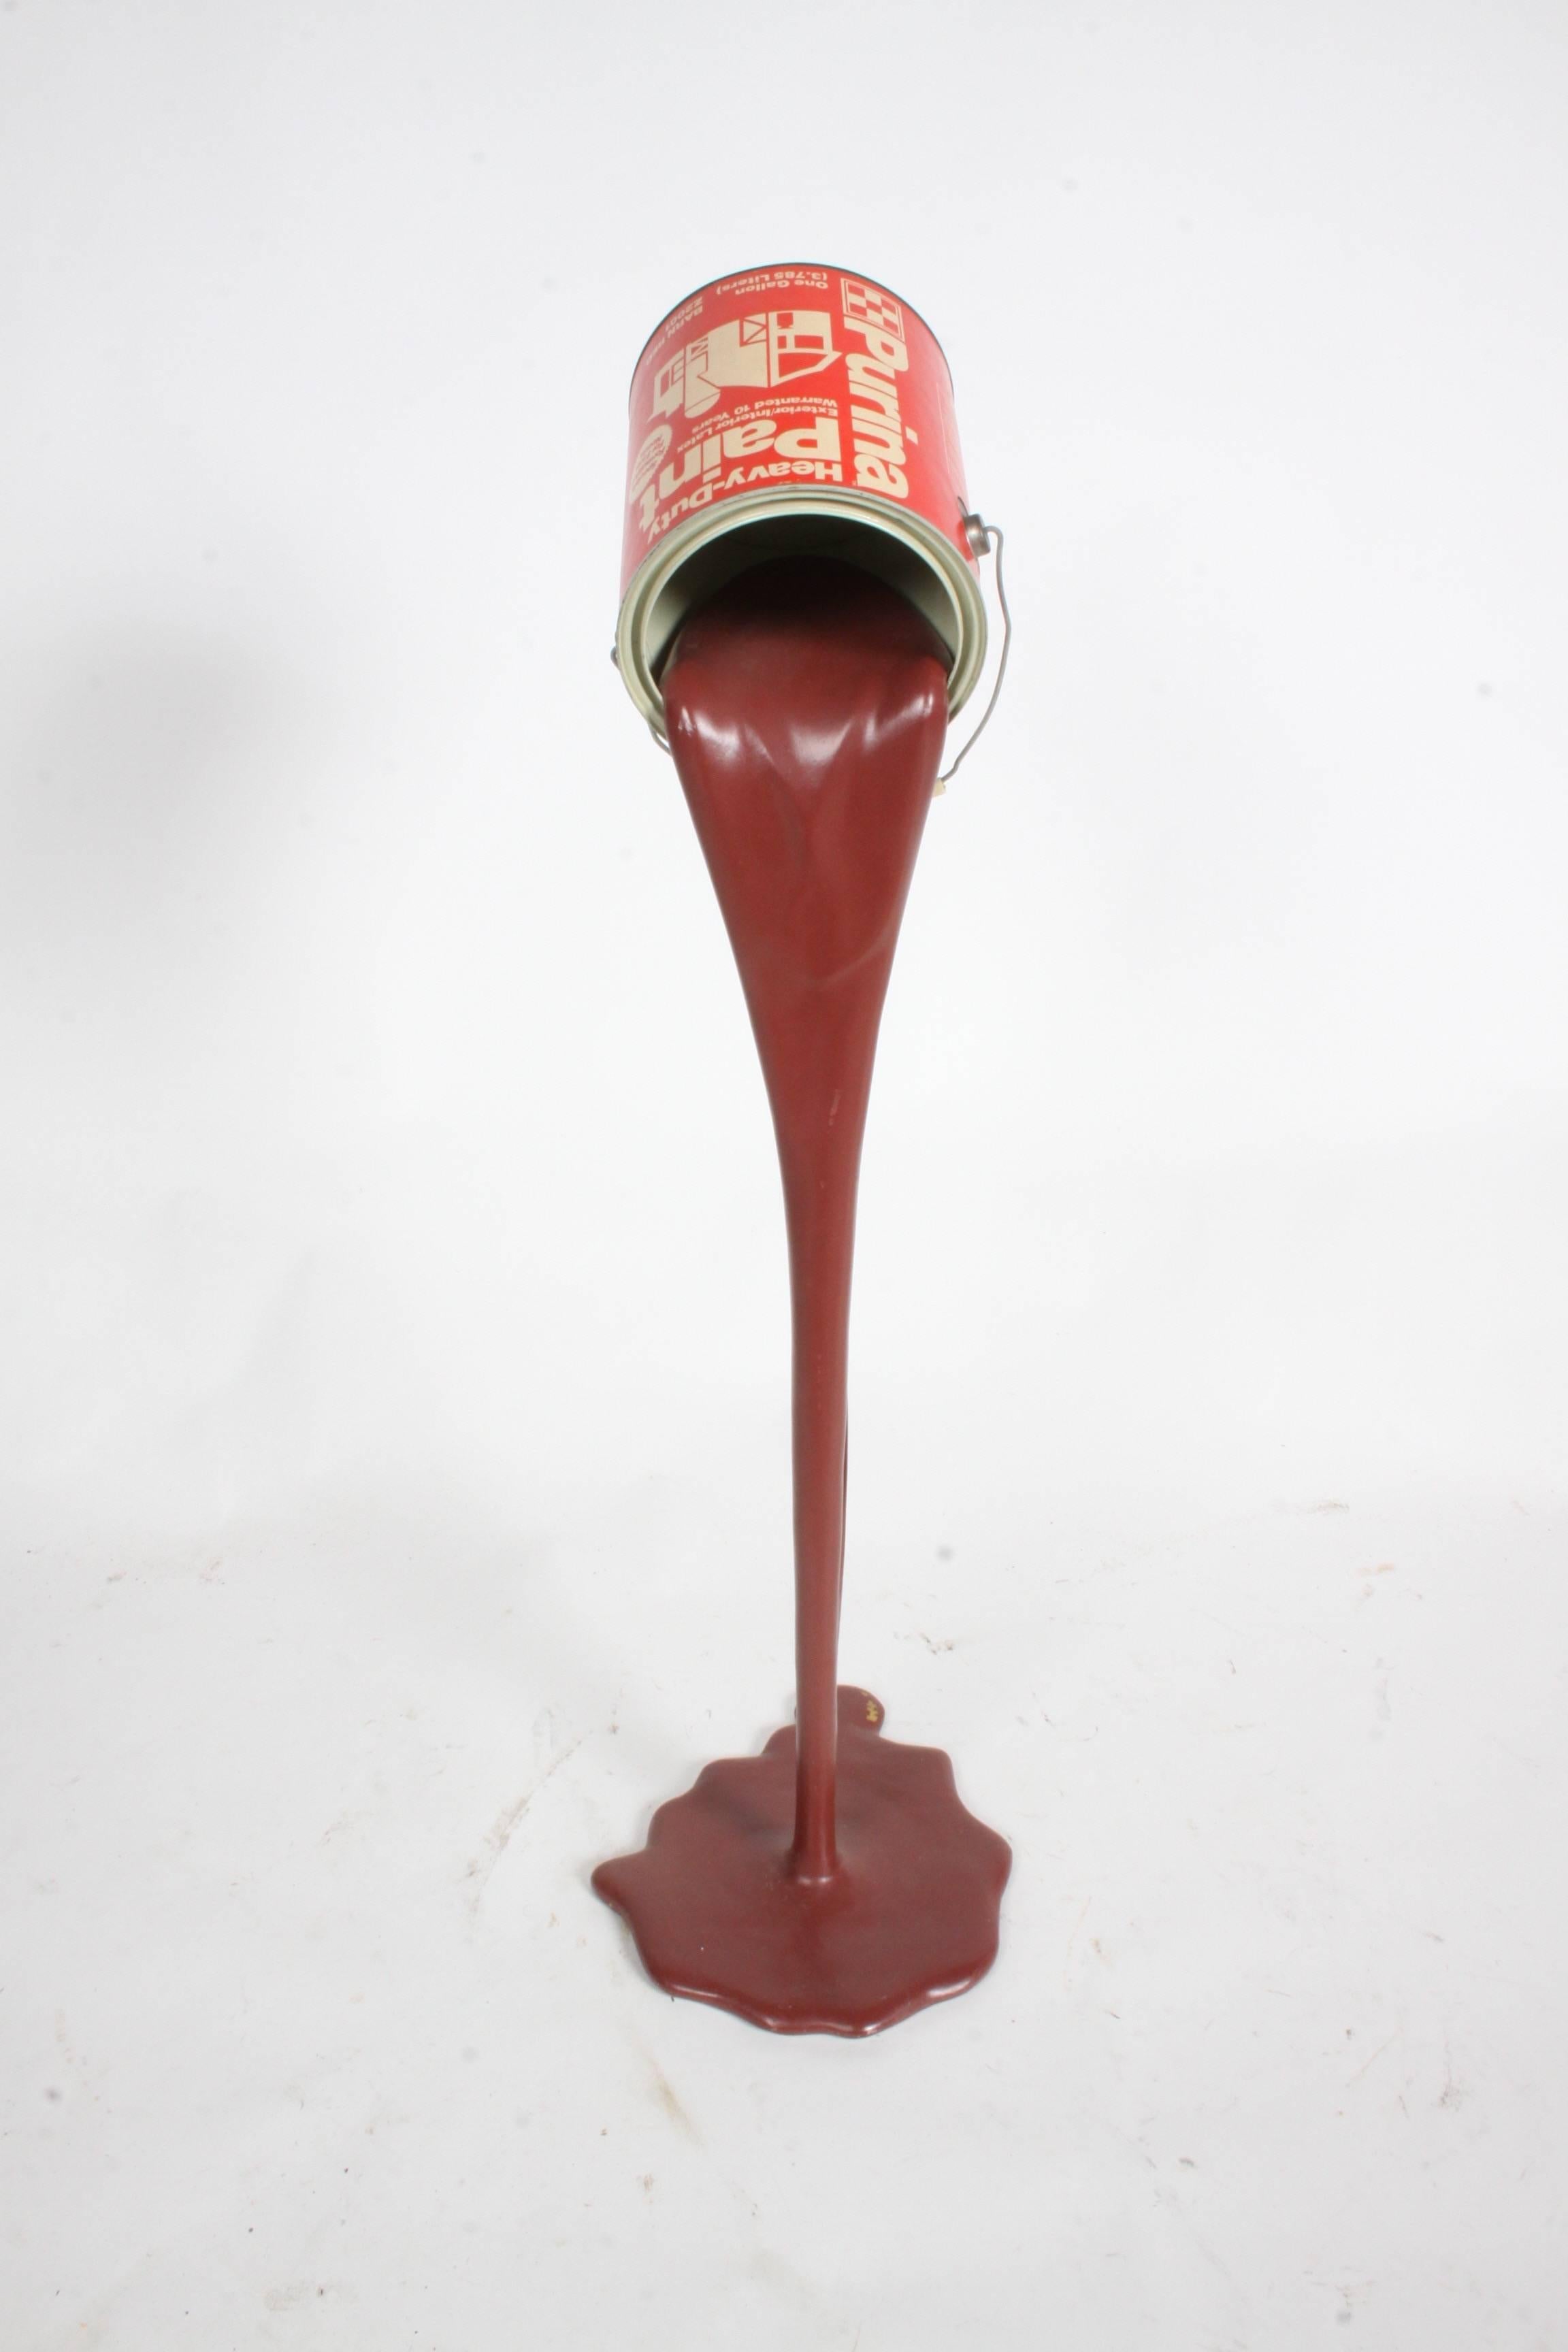 Unique gallon paint can sculpture that was a display for Ralston Purina brand paints Barn Red Z2001. Poured resin paint, shows some, loss wear to paint. Paint can and label in very nice condition. Poured or spilled paint design.